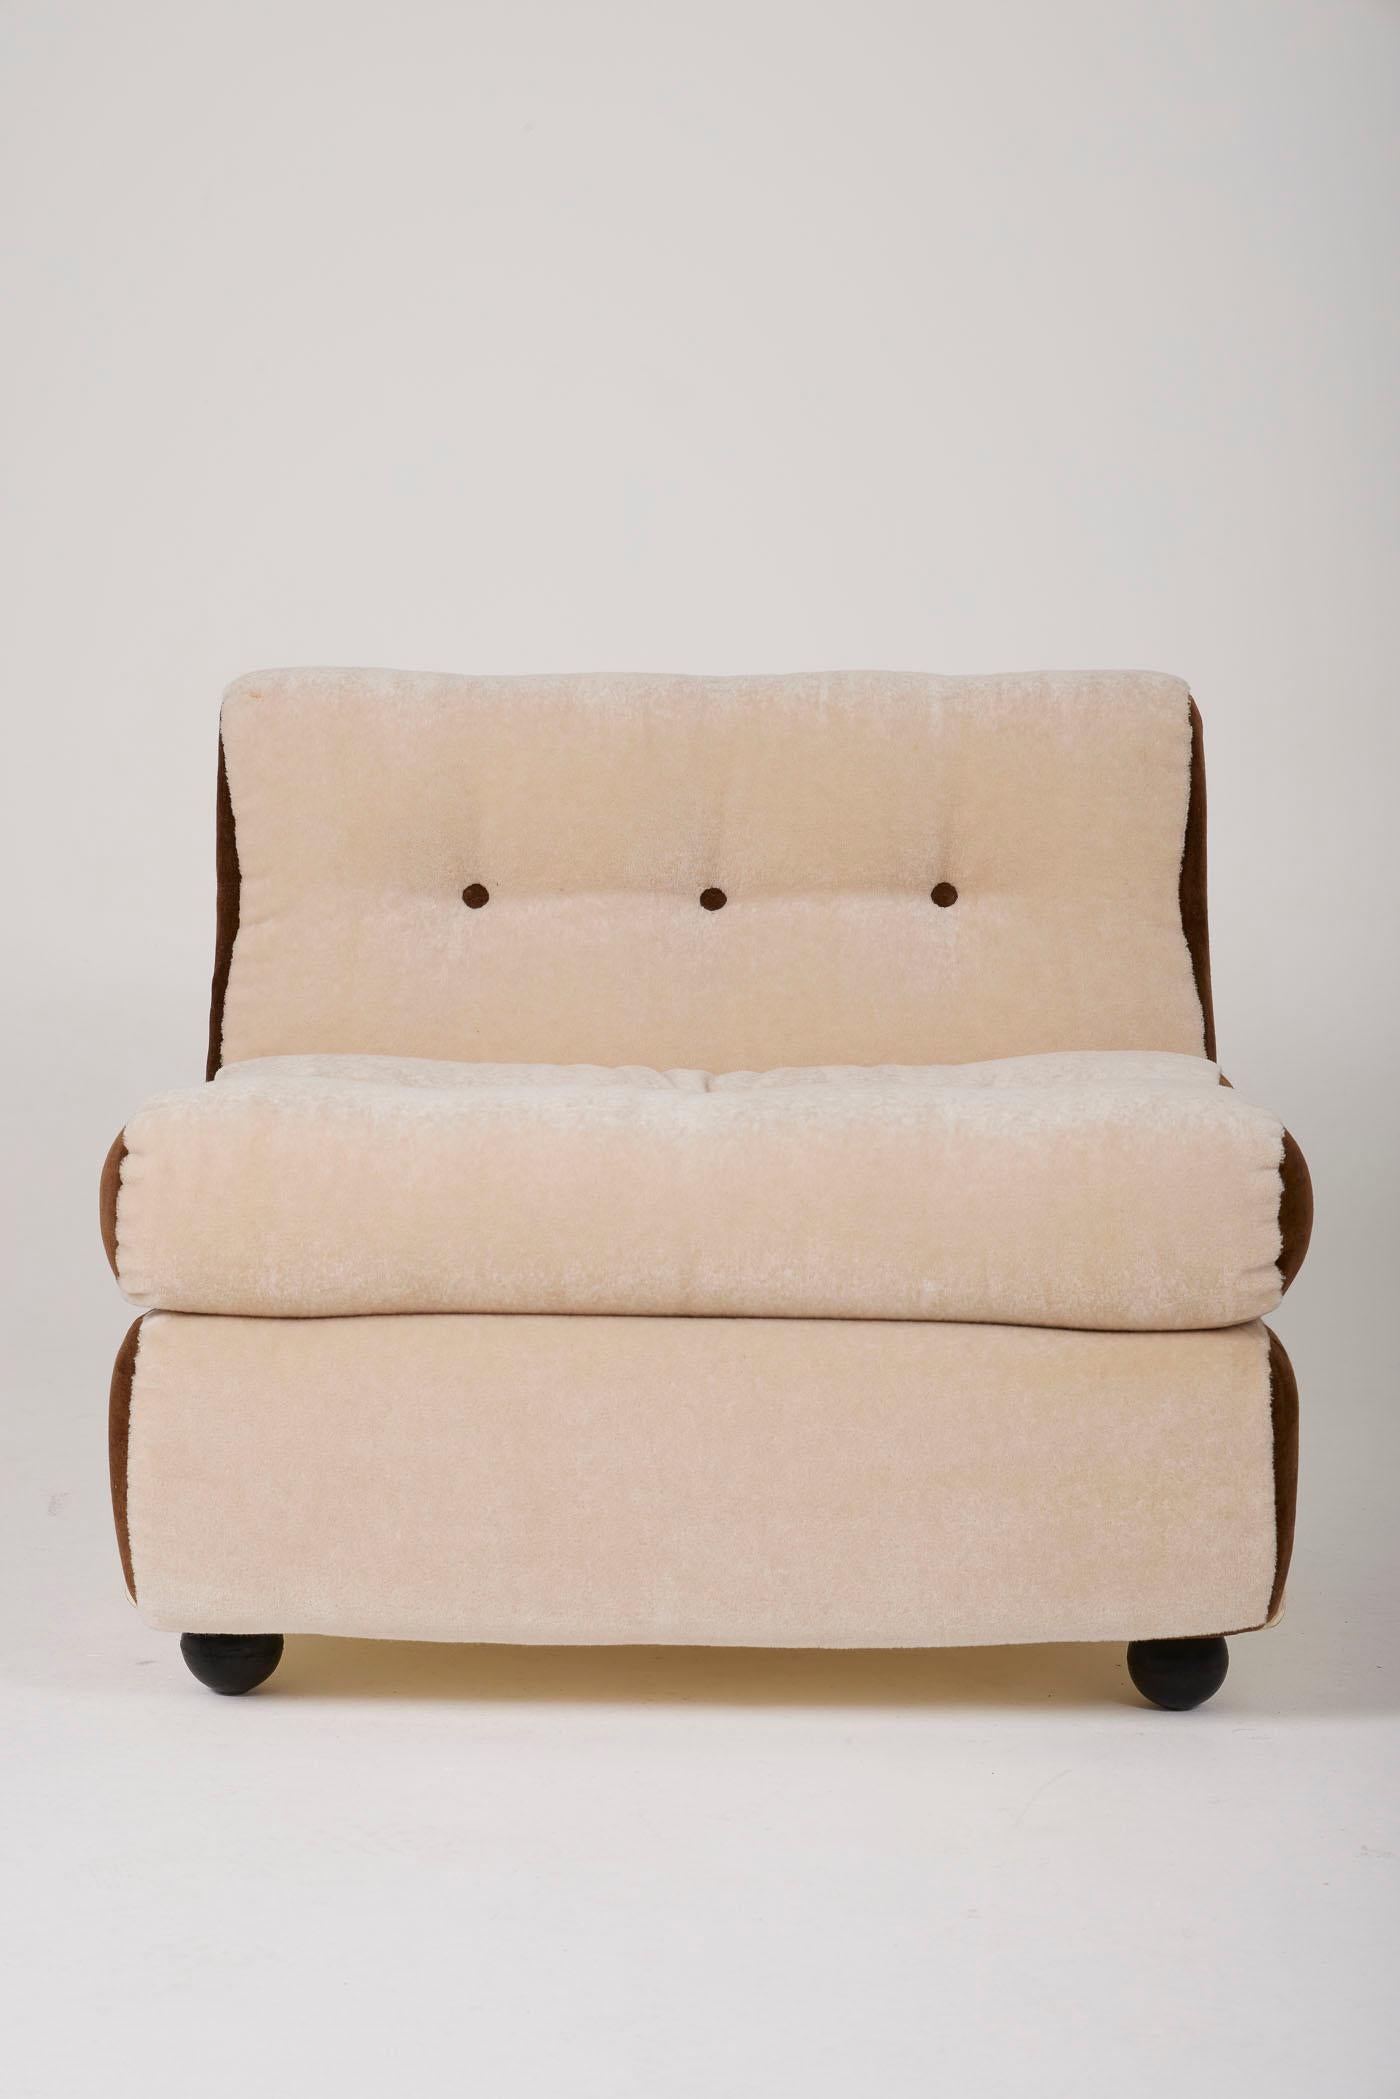 Amanta armchair by designer Mario Bellini. It was produced by C&B Italia in the 1970s. Fiberglass shell, backrest, and seat reupholstered in beige and brown velvet. Very good condition.
DV337